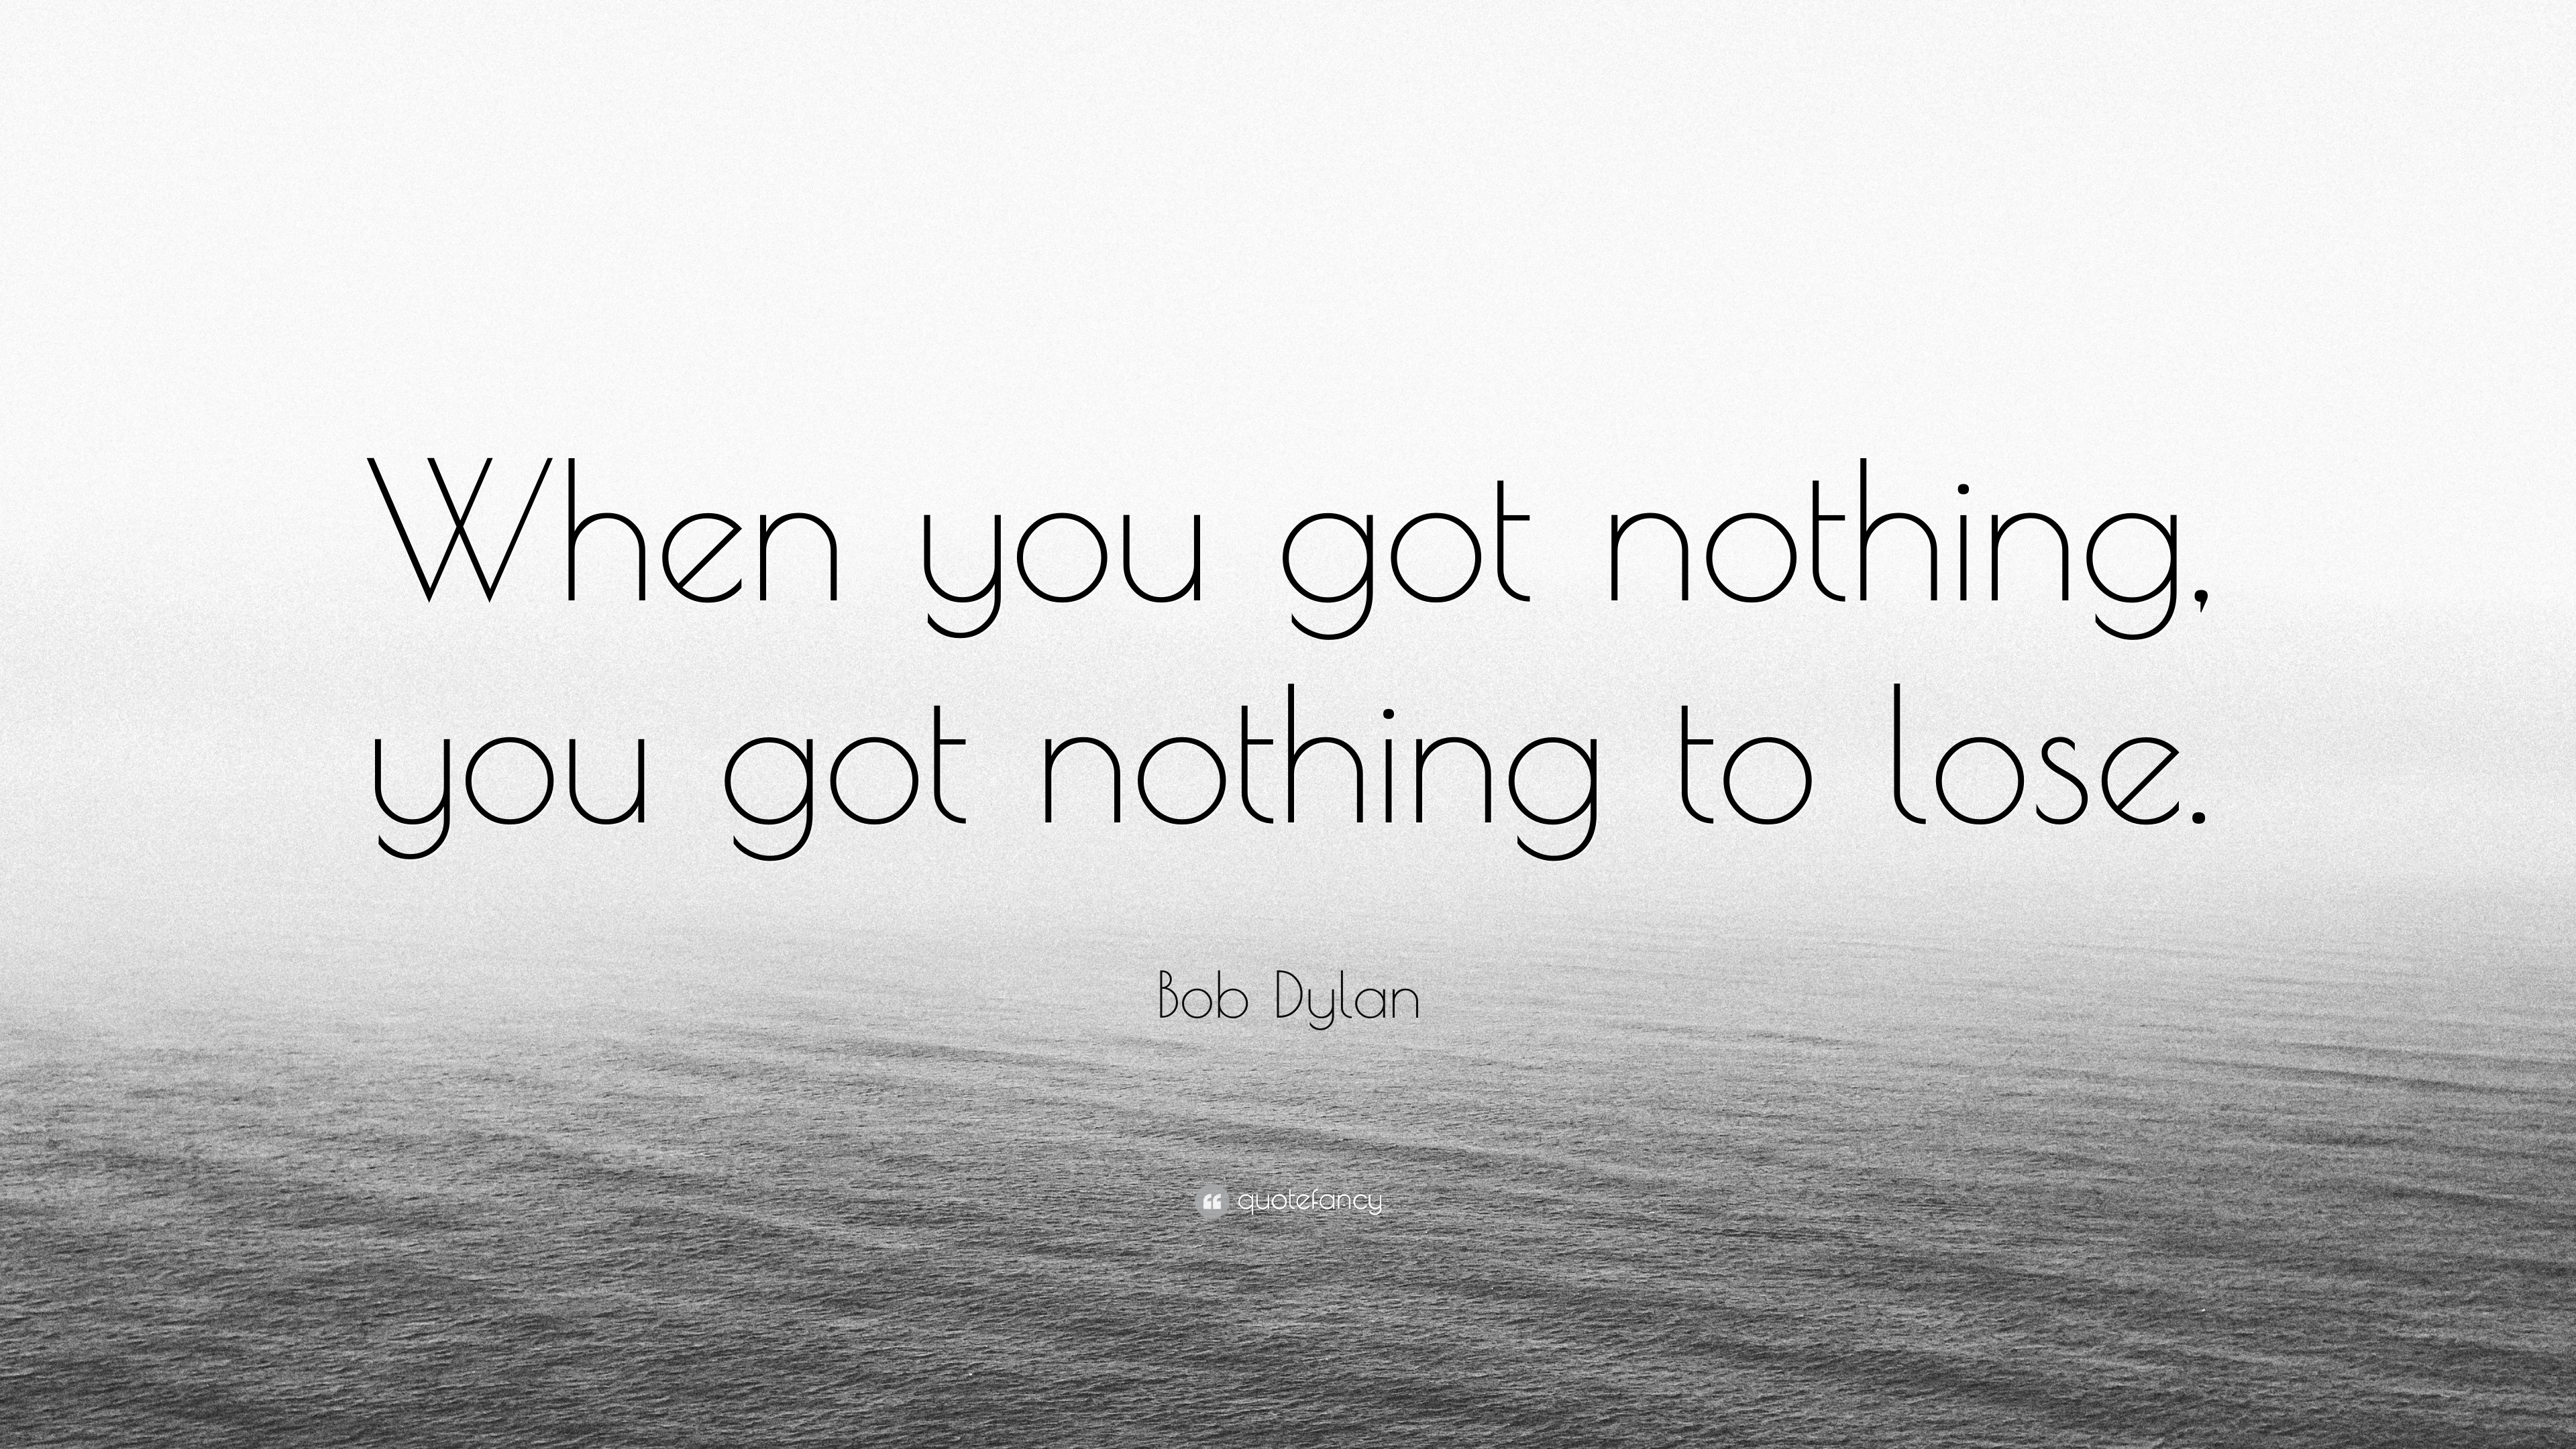 https://quotefancy.com/media/wallpaper/3840x2160/2008719-Bob-Dylan-Quote-When-you-got-nothing-you-got-nothing-to-lose.jpg